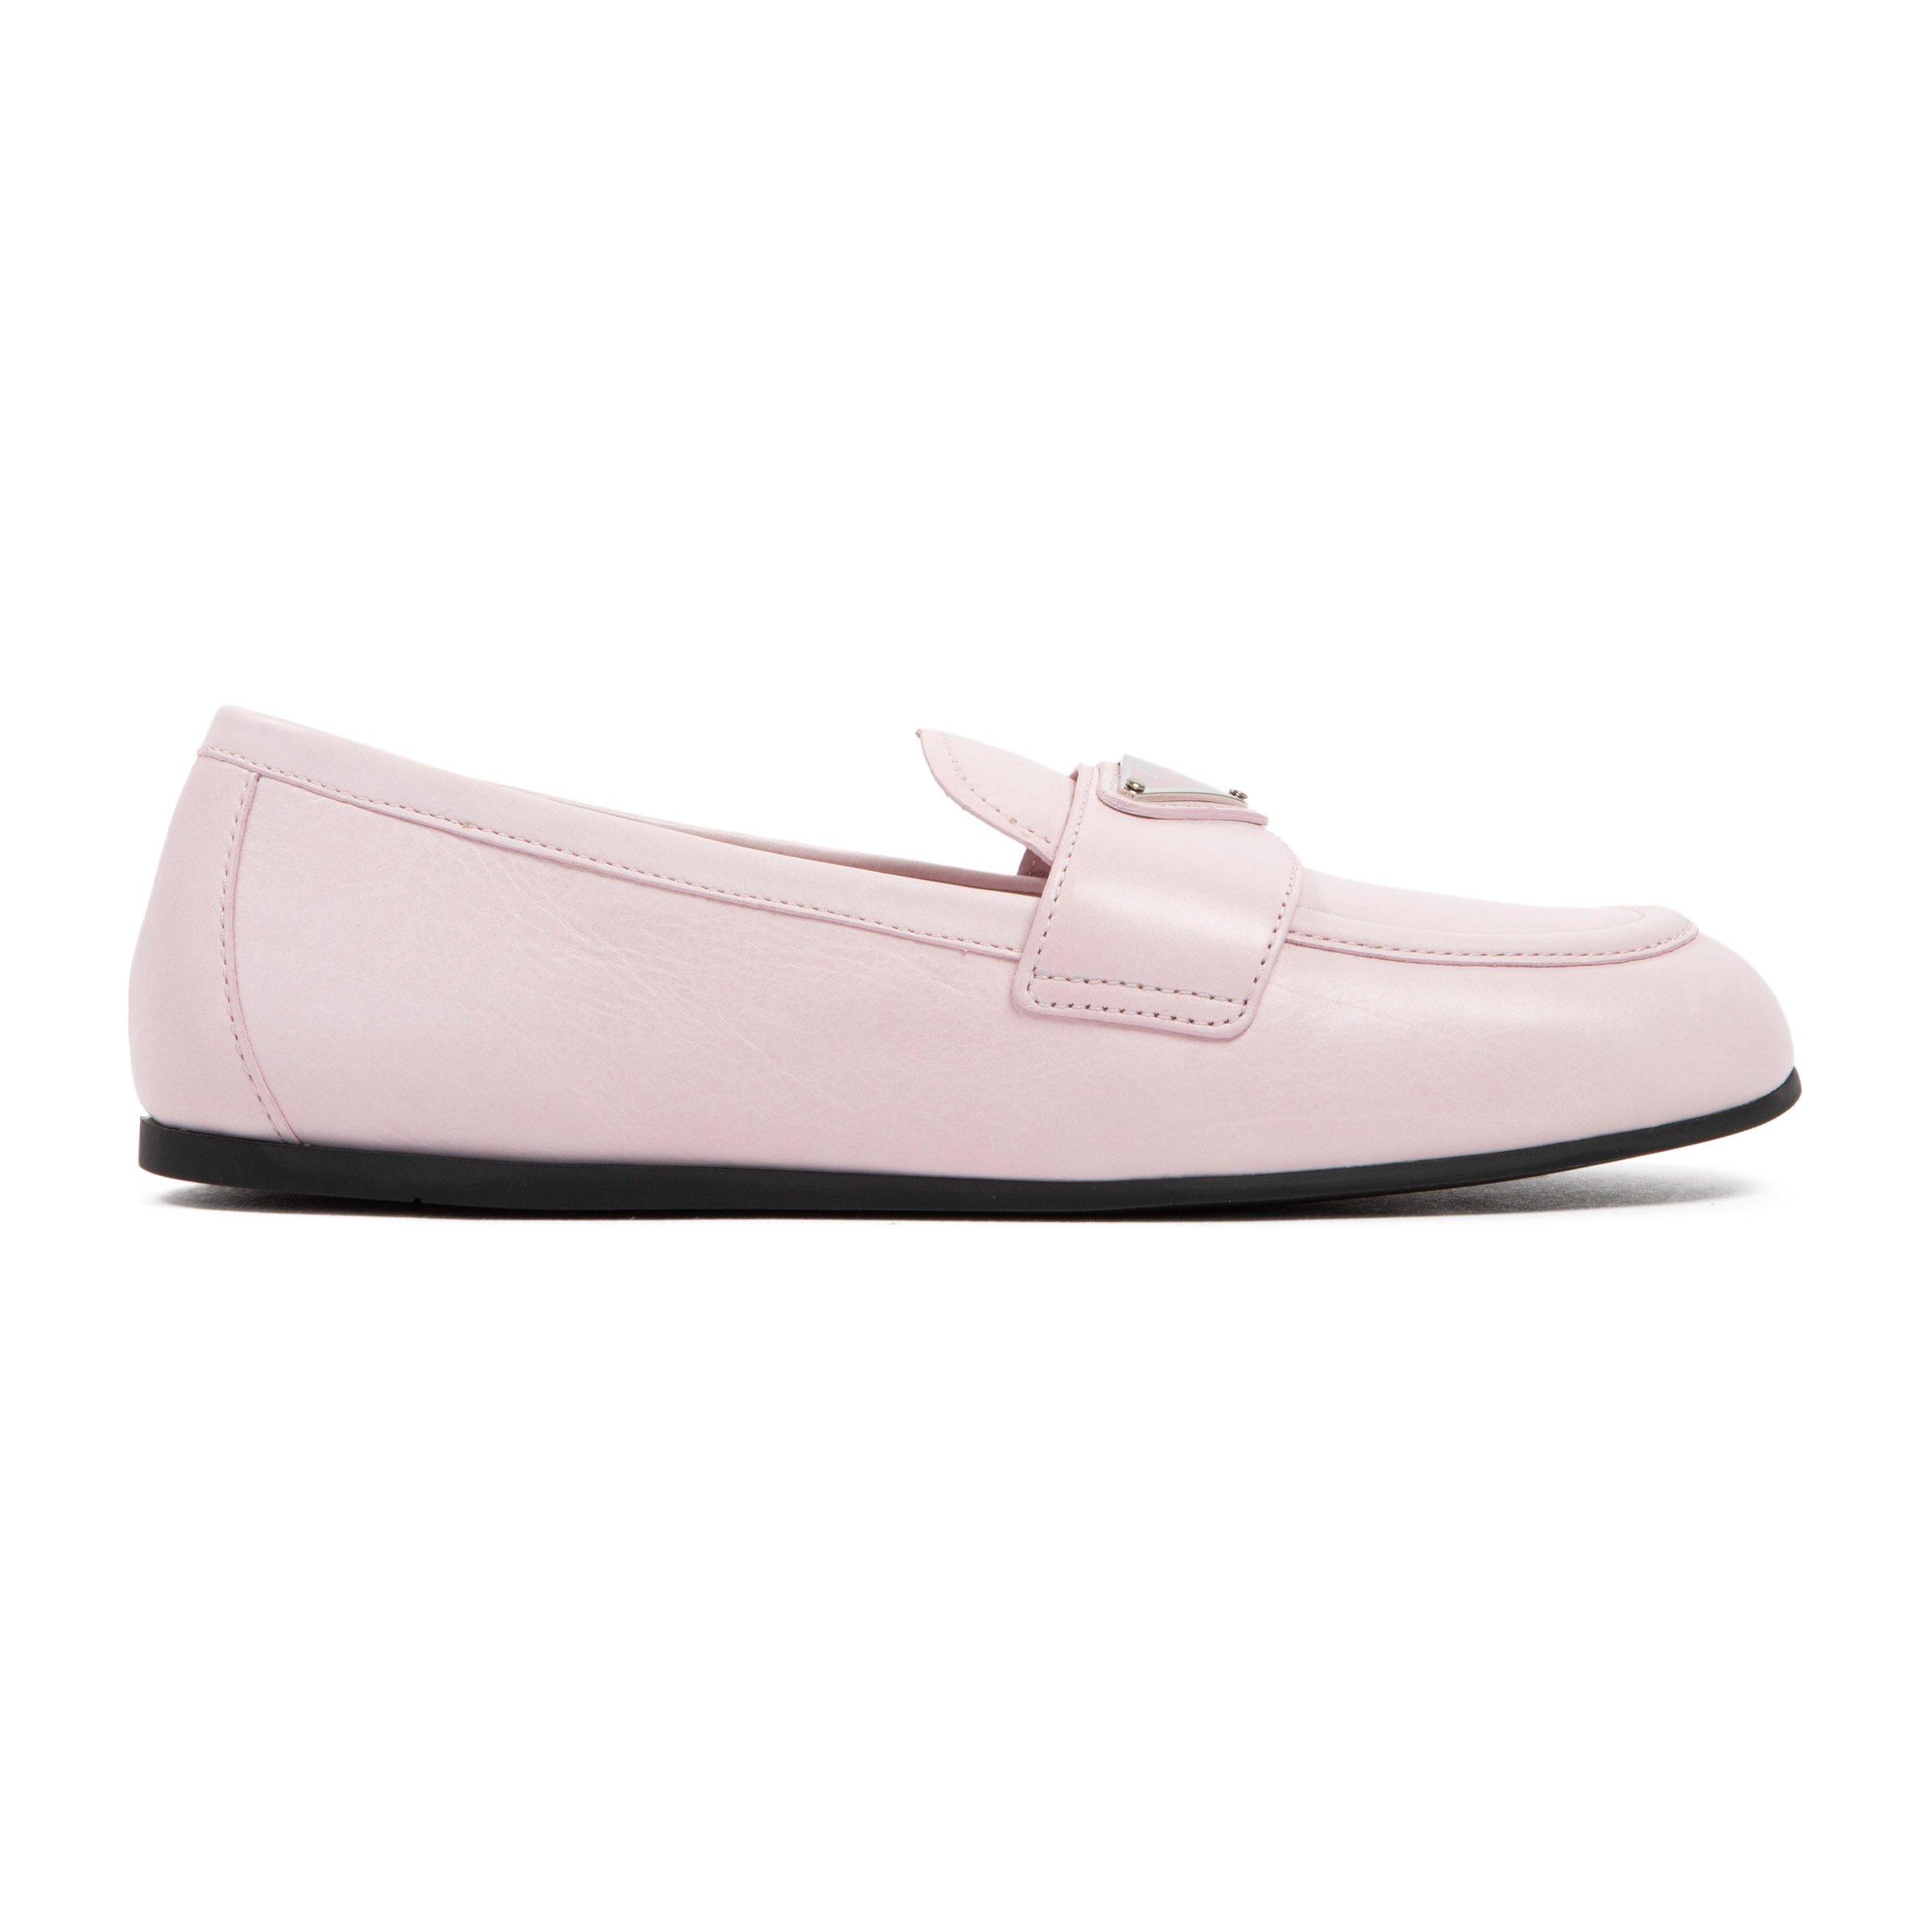 Prada Leather Loafers Shoes in Nude (Pink) - Lyst